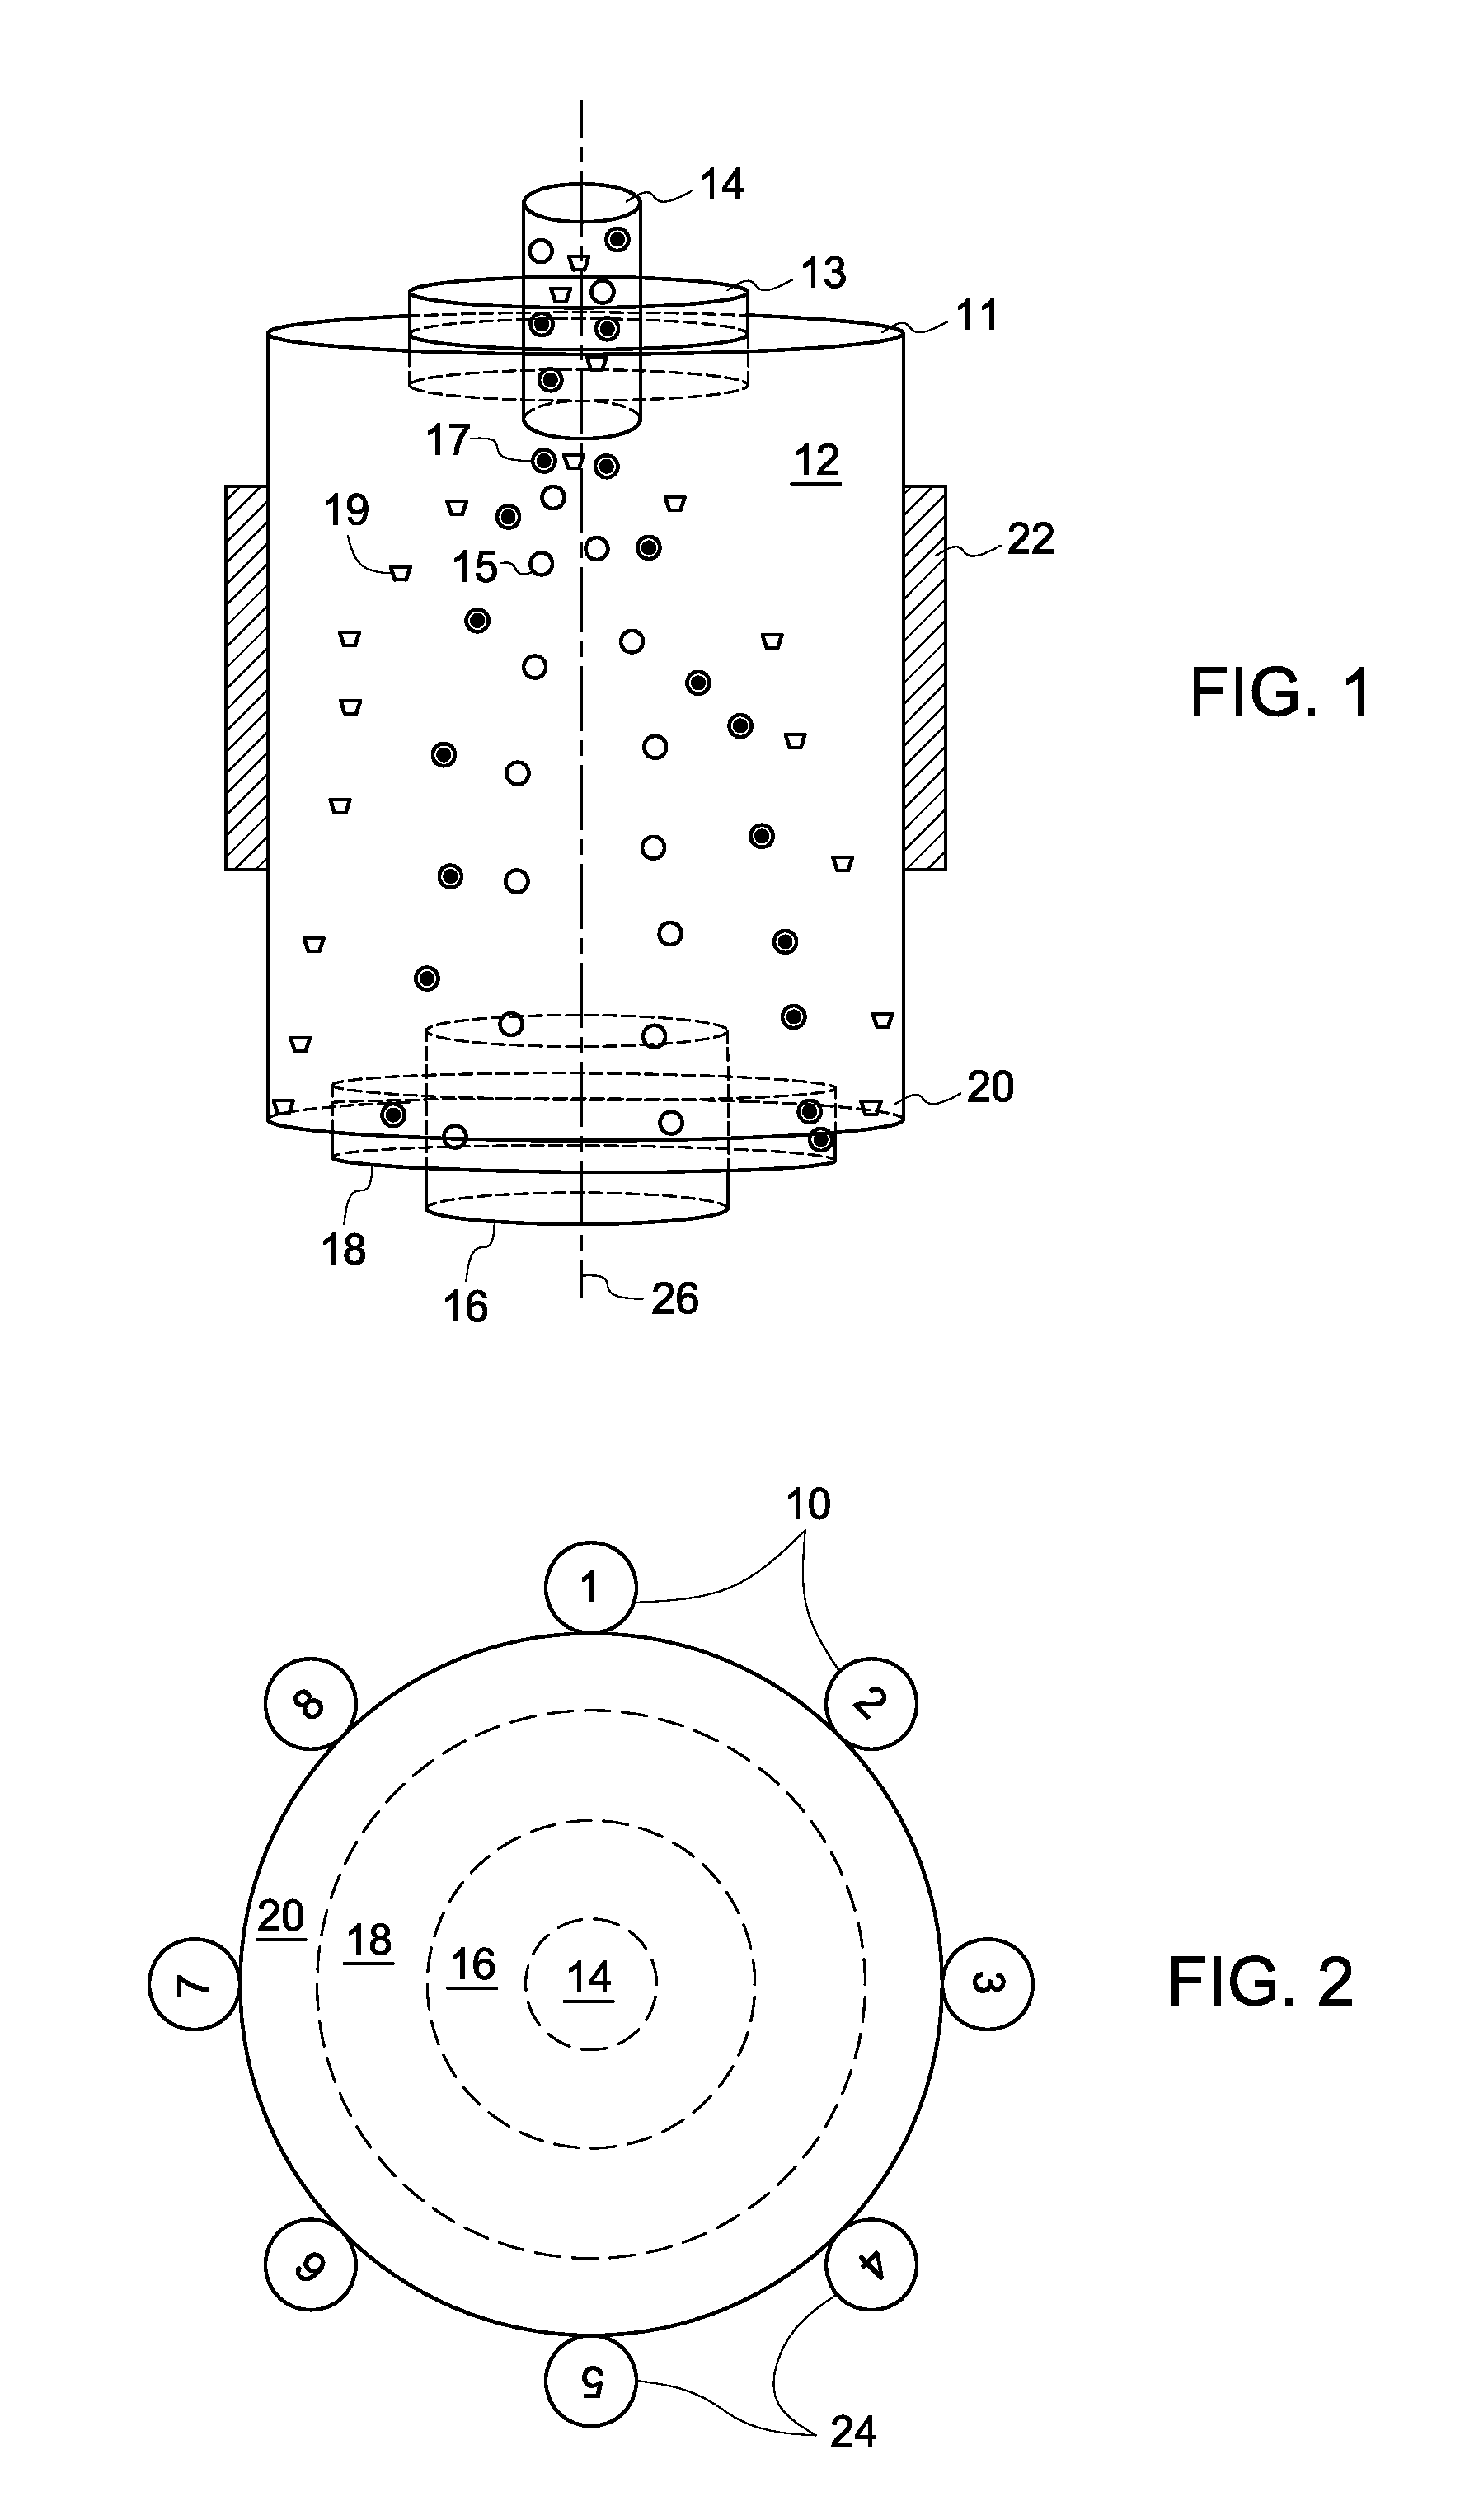 Systems and methods for magnetic separation of biological materials